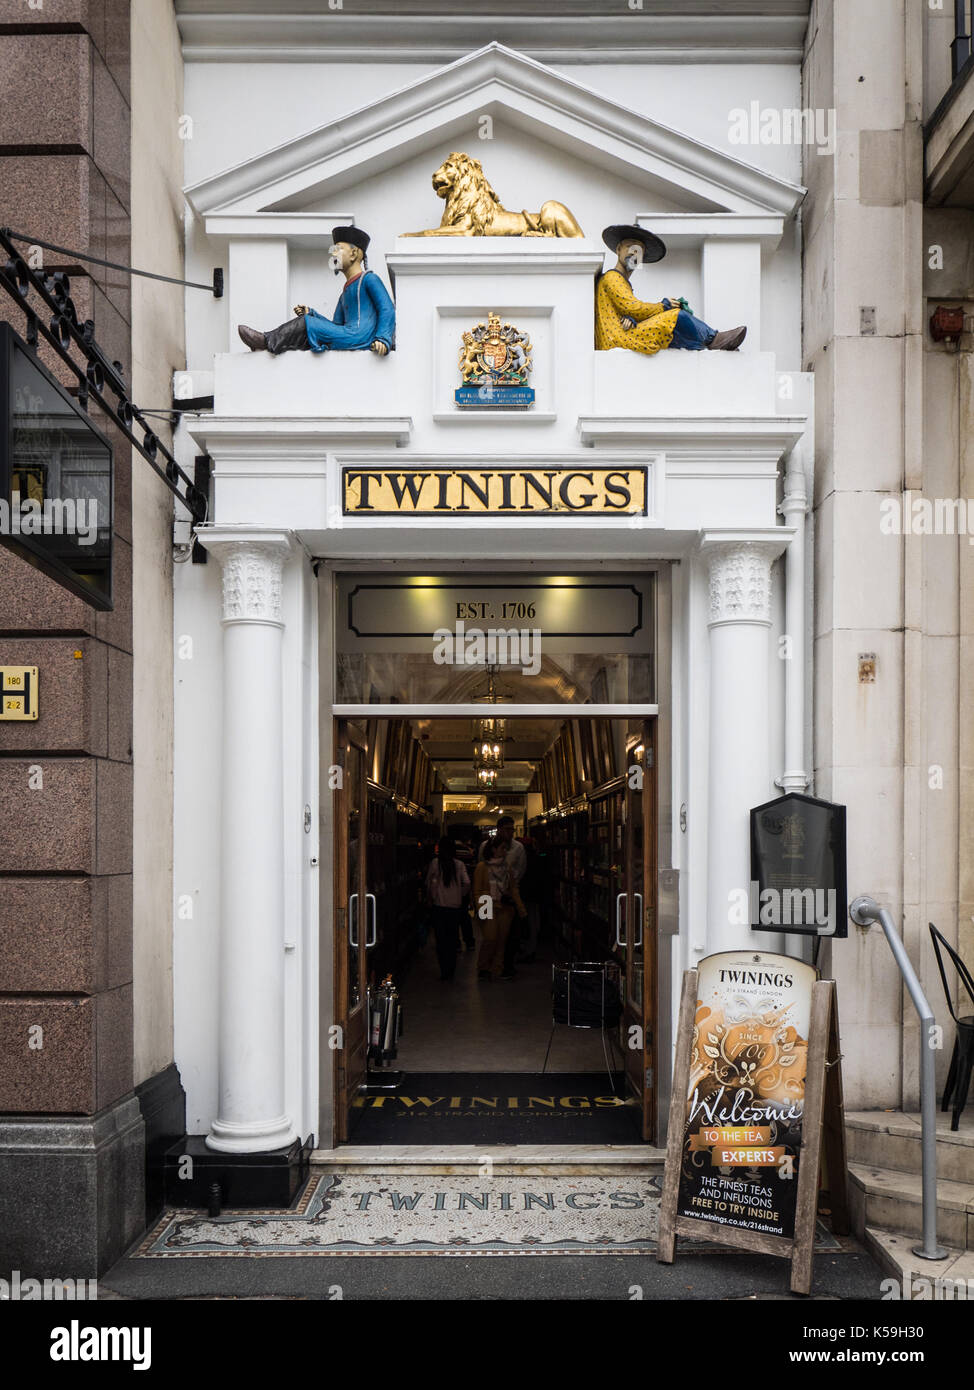 Twinings Tea historic tea store at 216 The Strand London - The oldest tea shop in London at over 300 years old Stock Photo